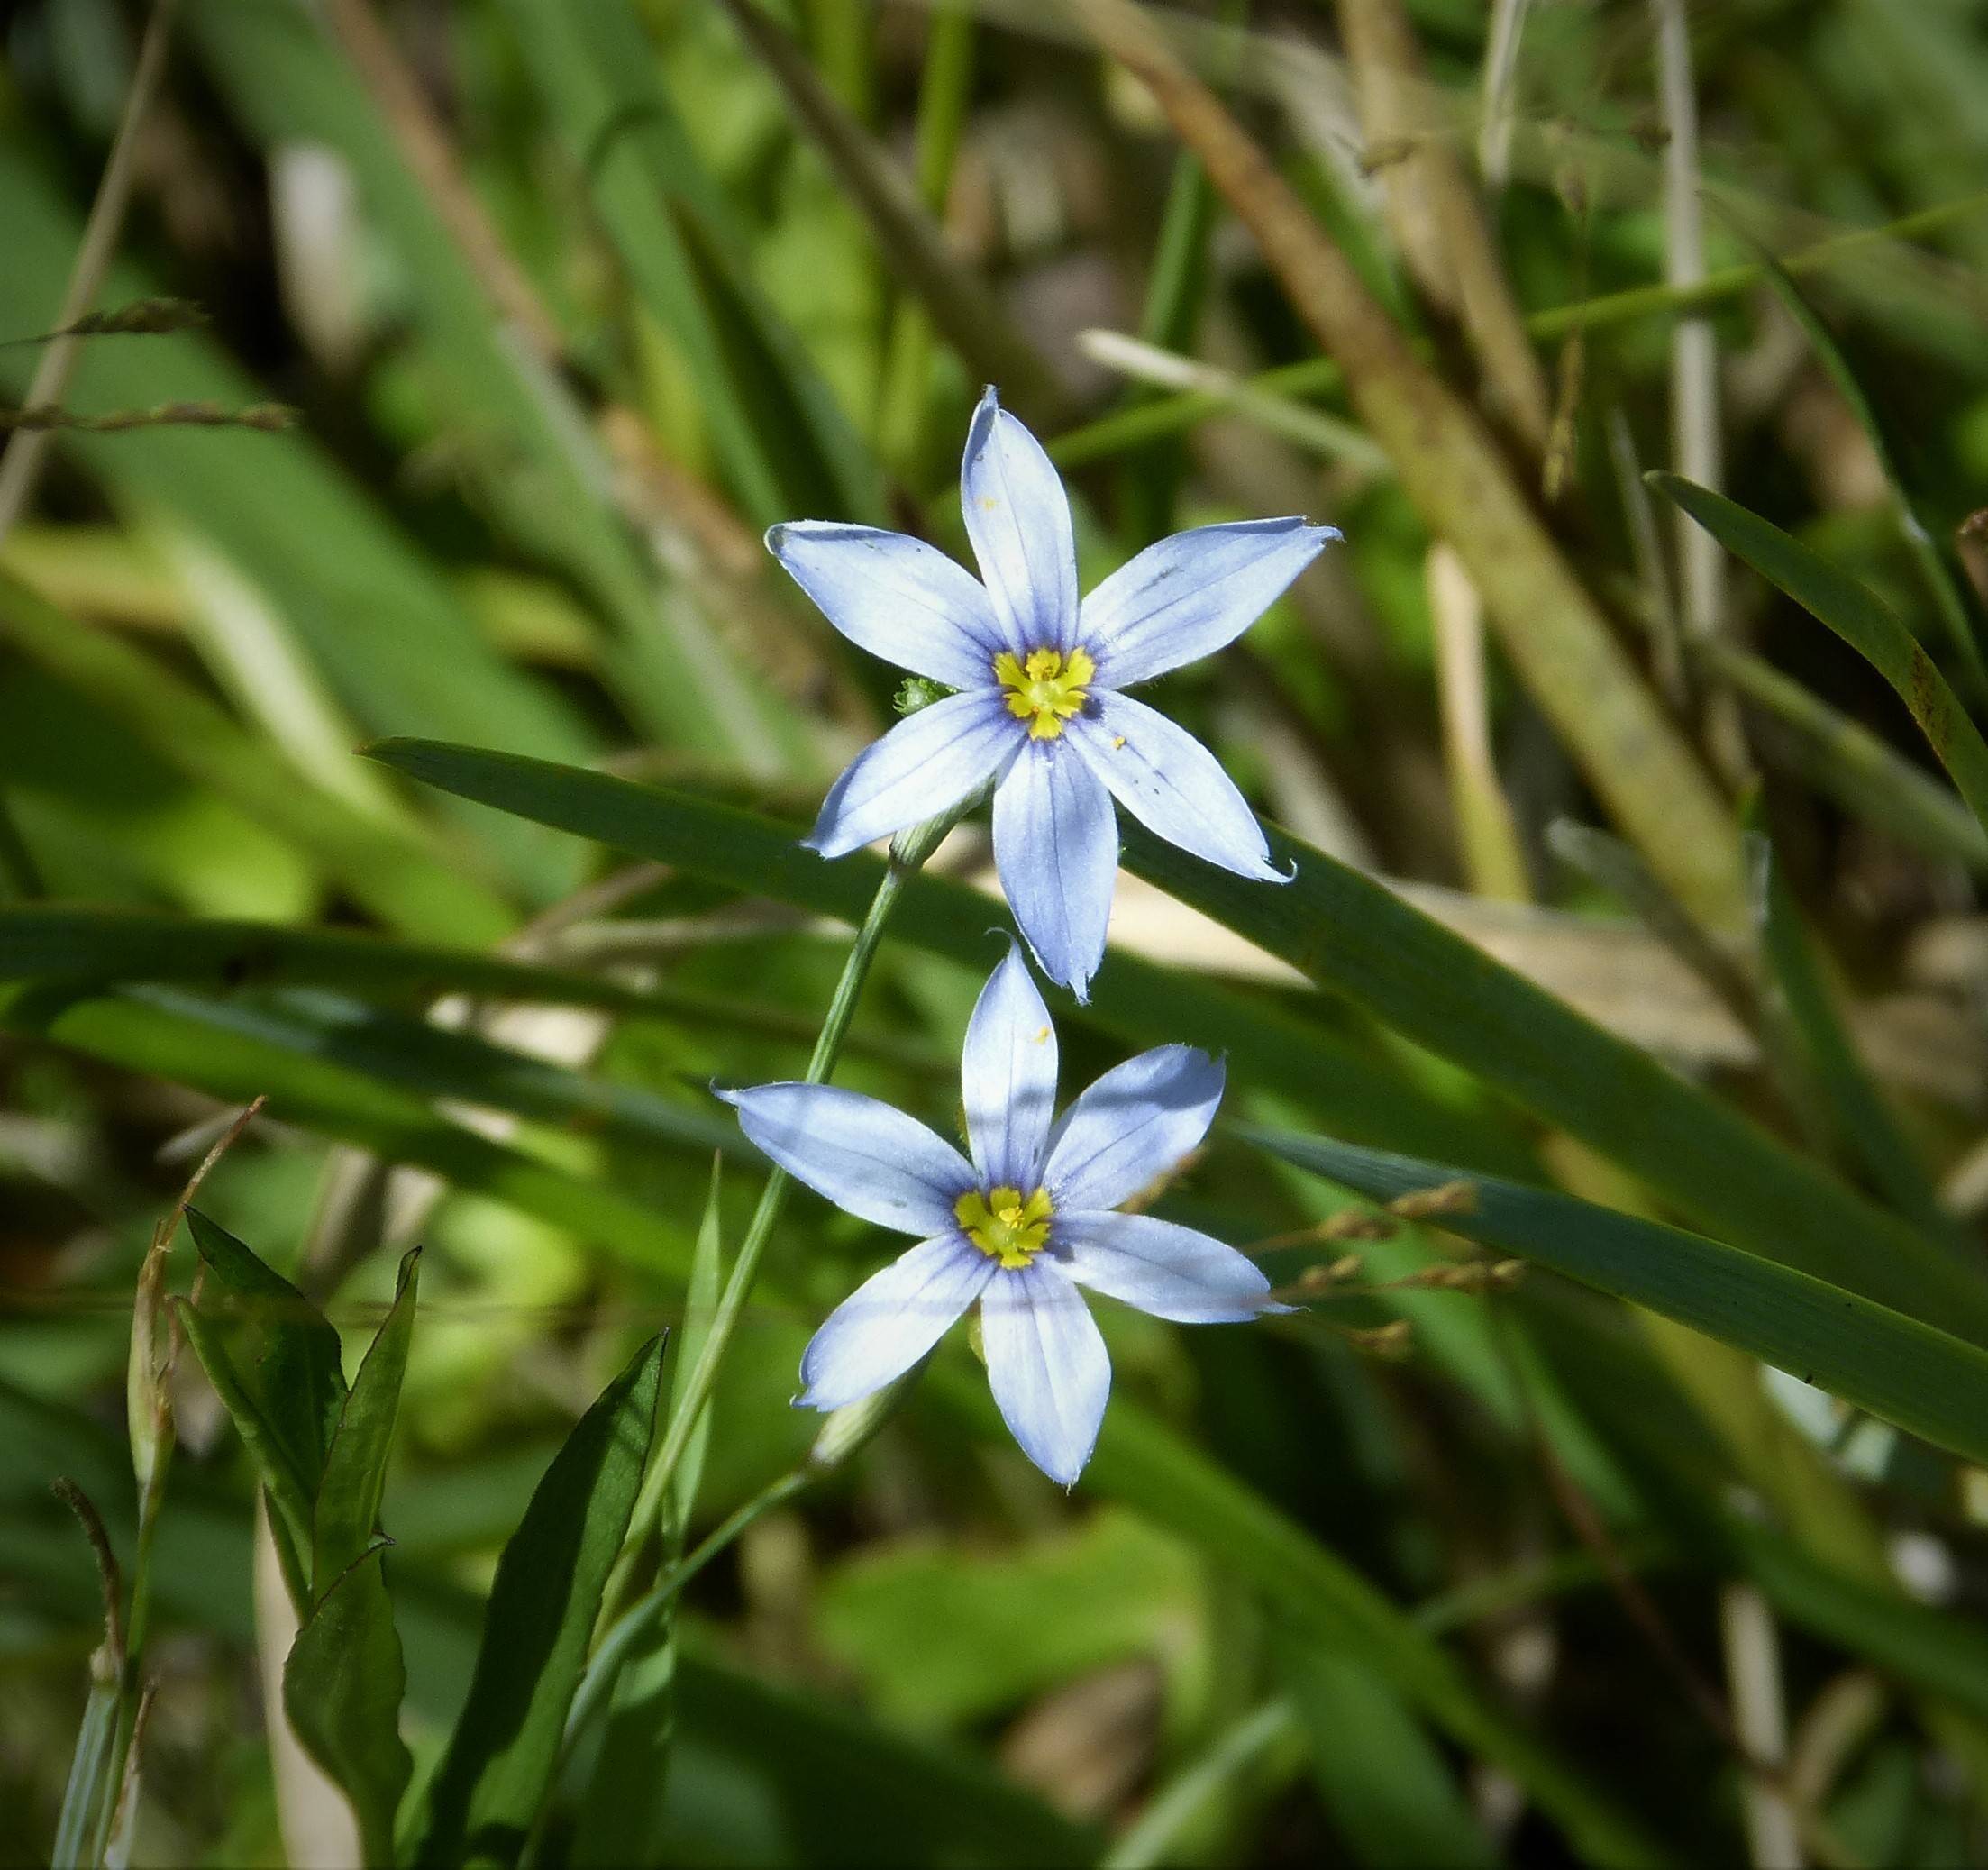 light-blue flowers with yellow center, green leaves and stems